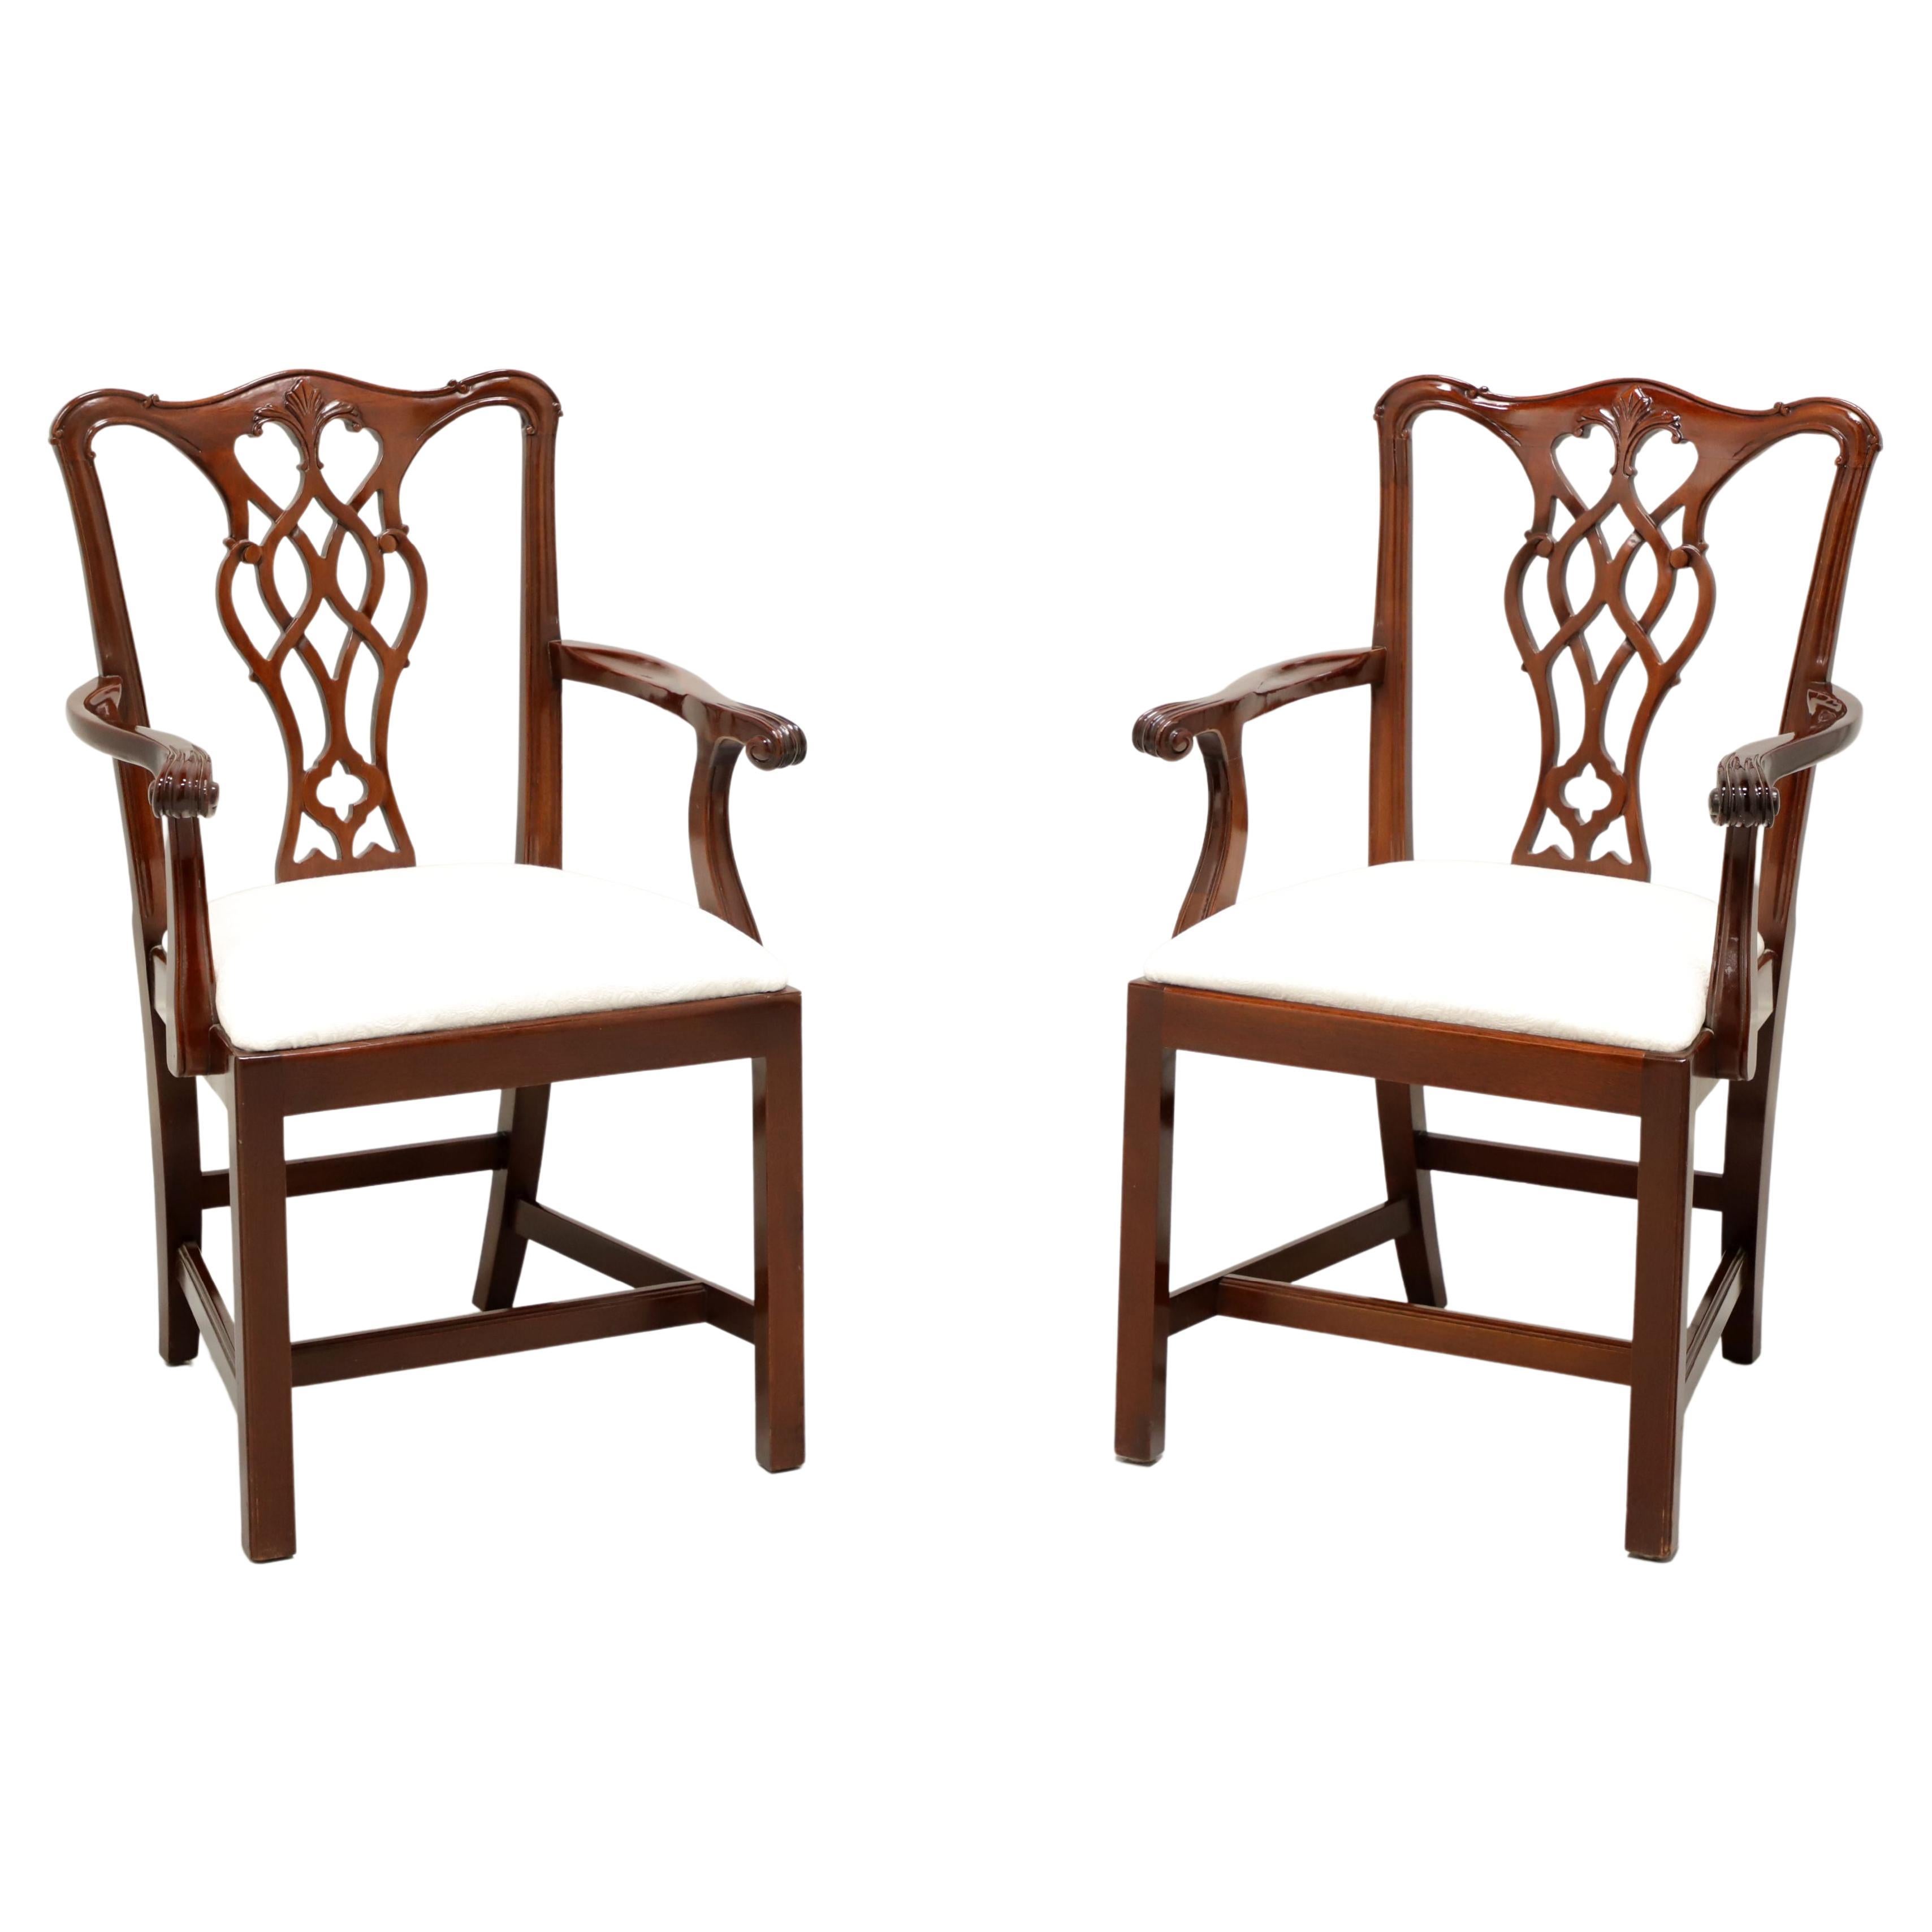 COUNCILL Mahogany Chippendale Style Straight Leg Dining Armchairs - Pair